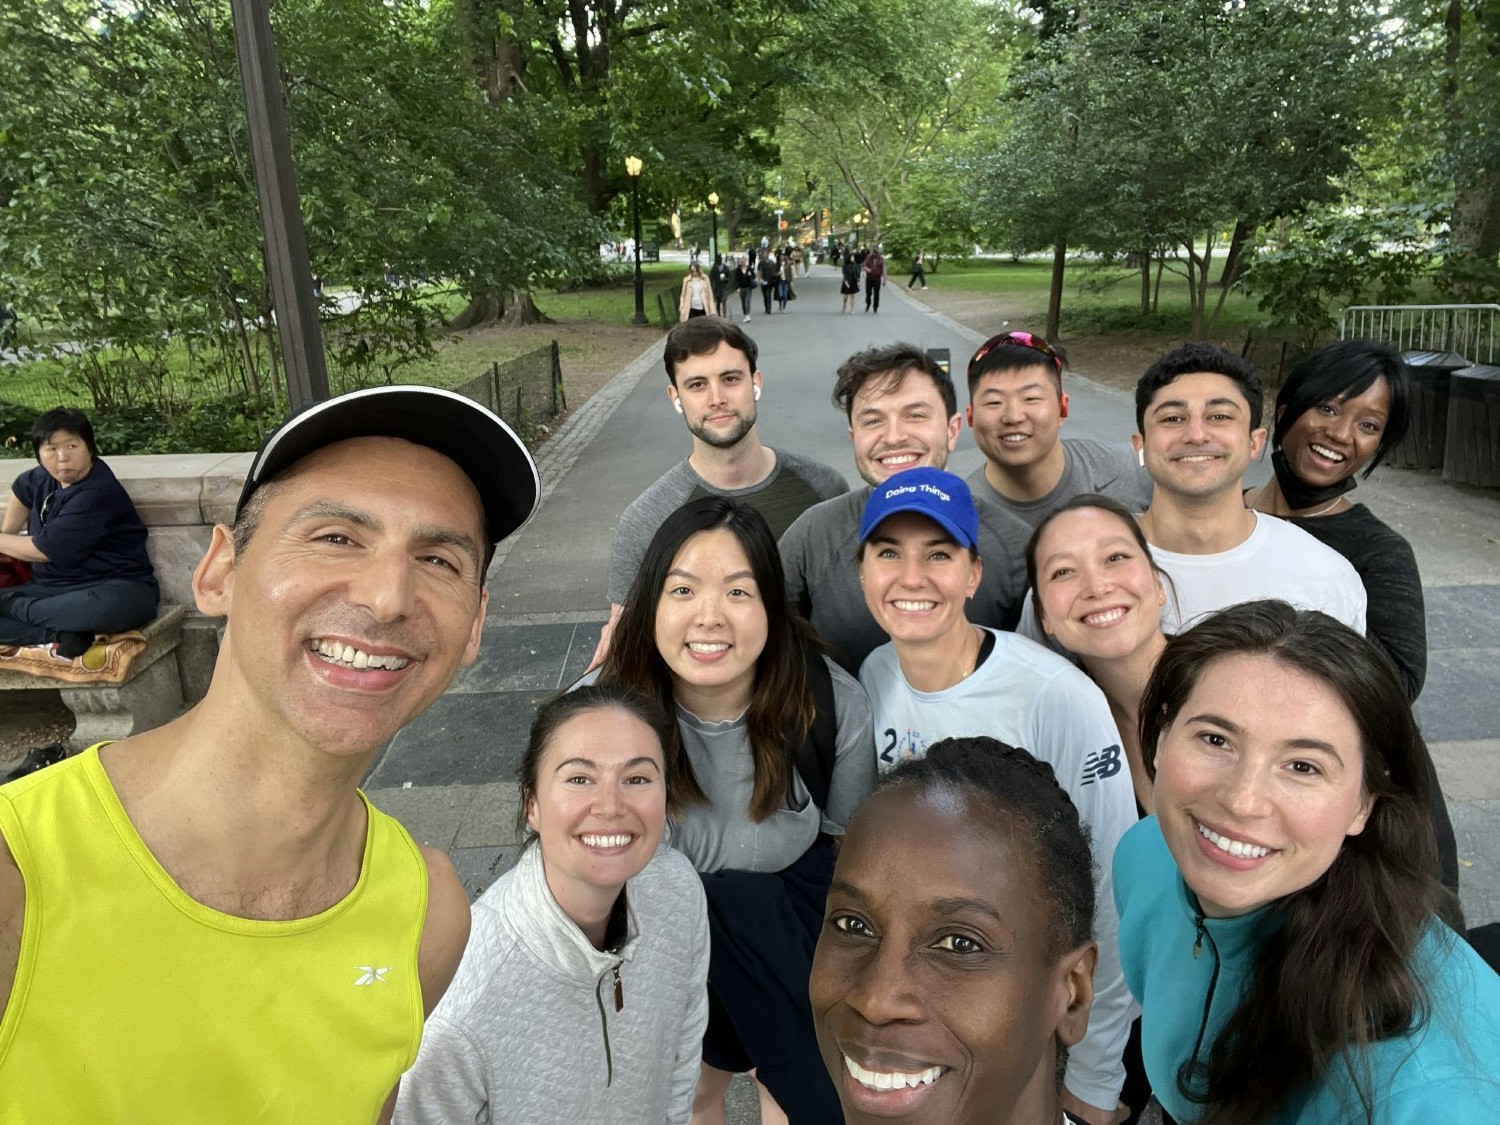 New York's Running/Walking Club Gathered Weekly in Central Park